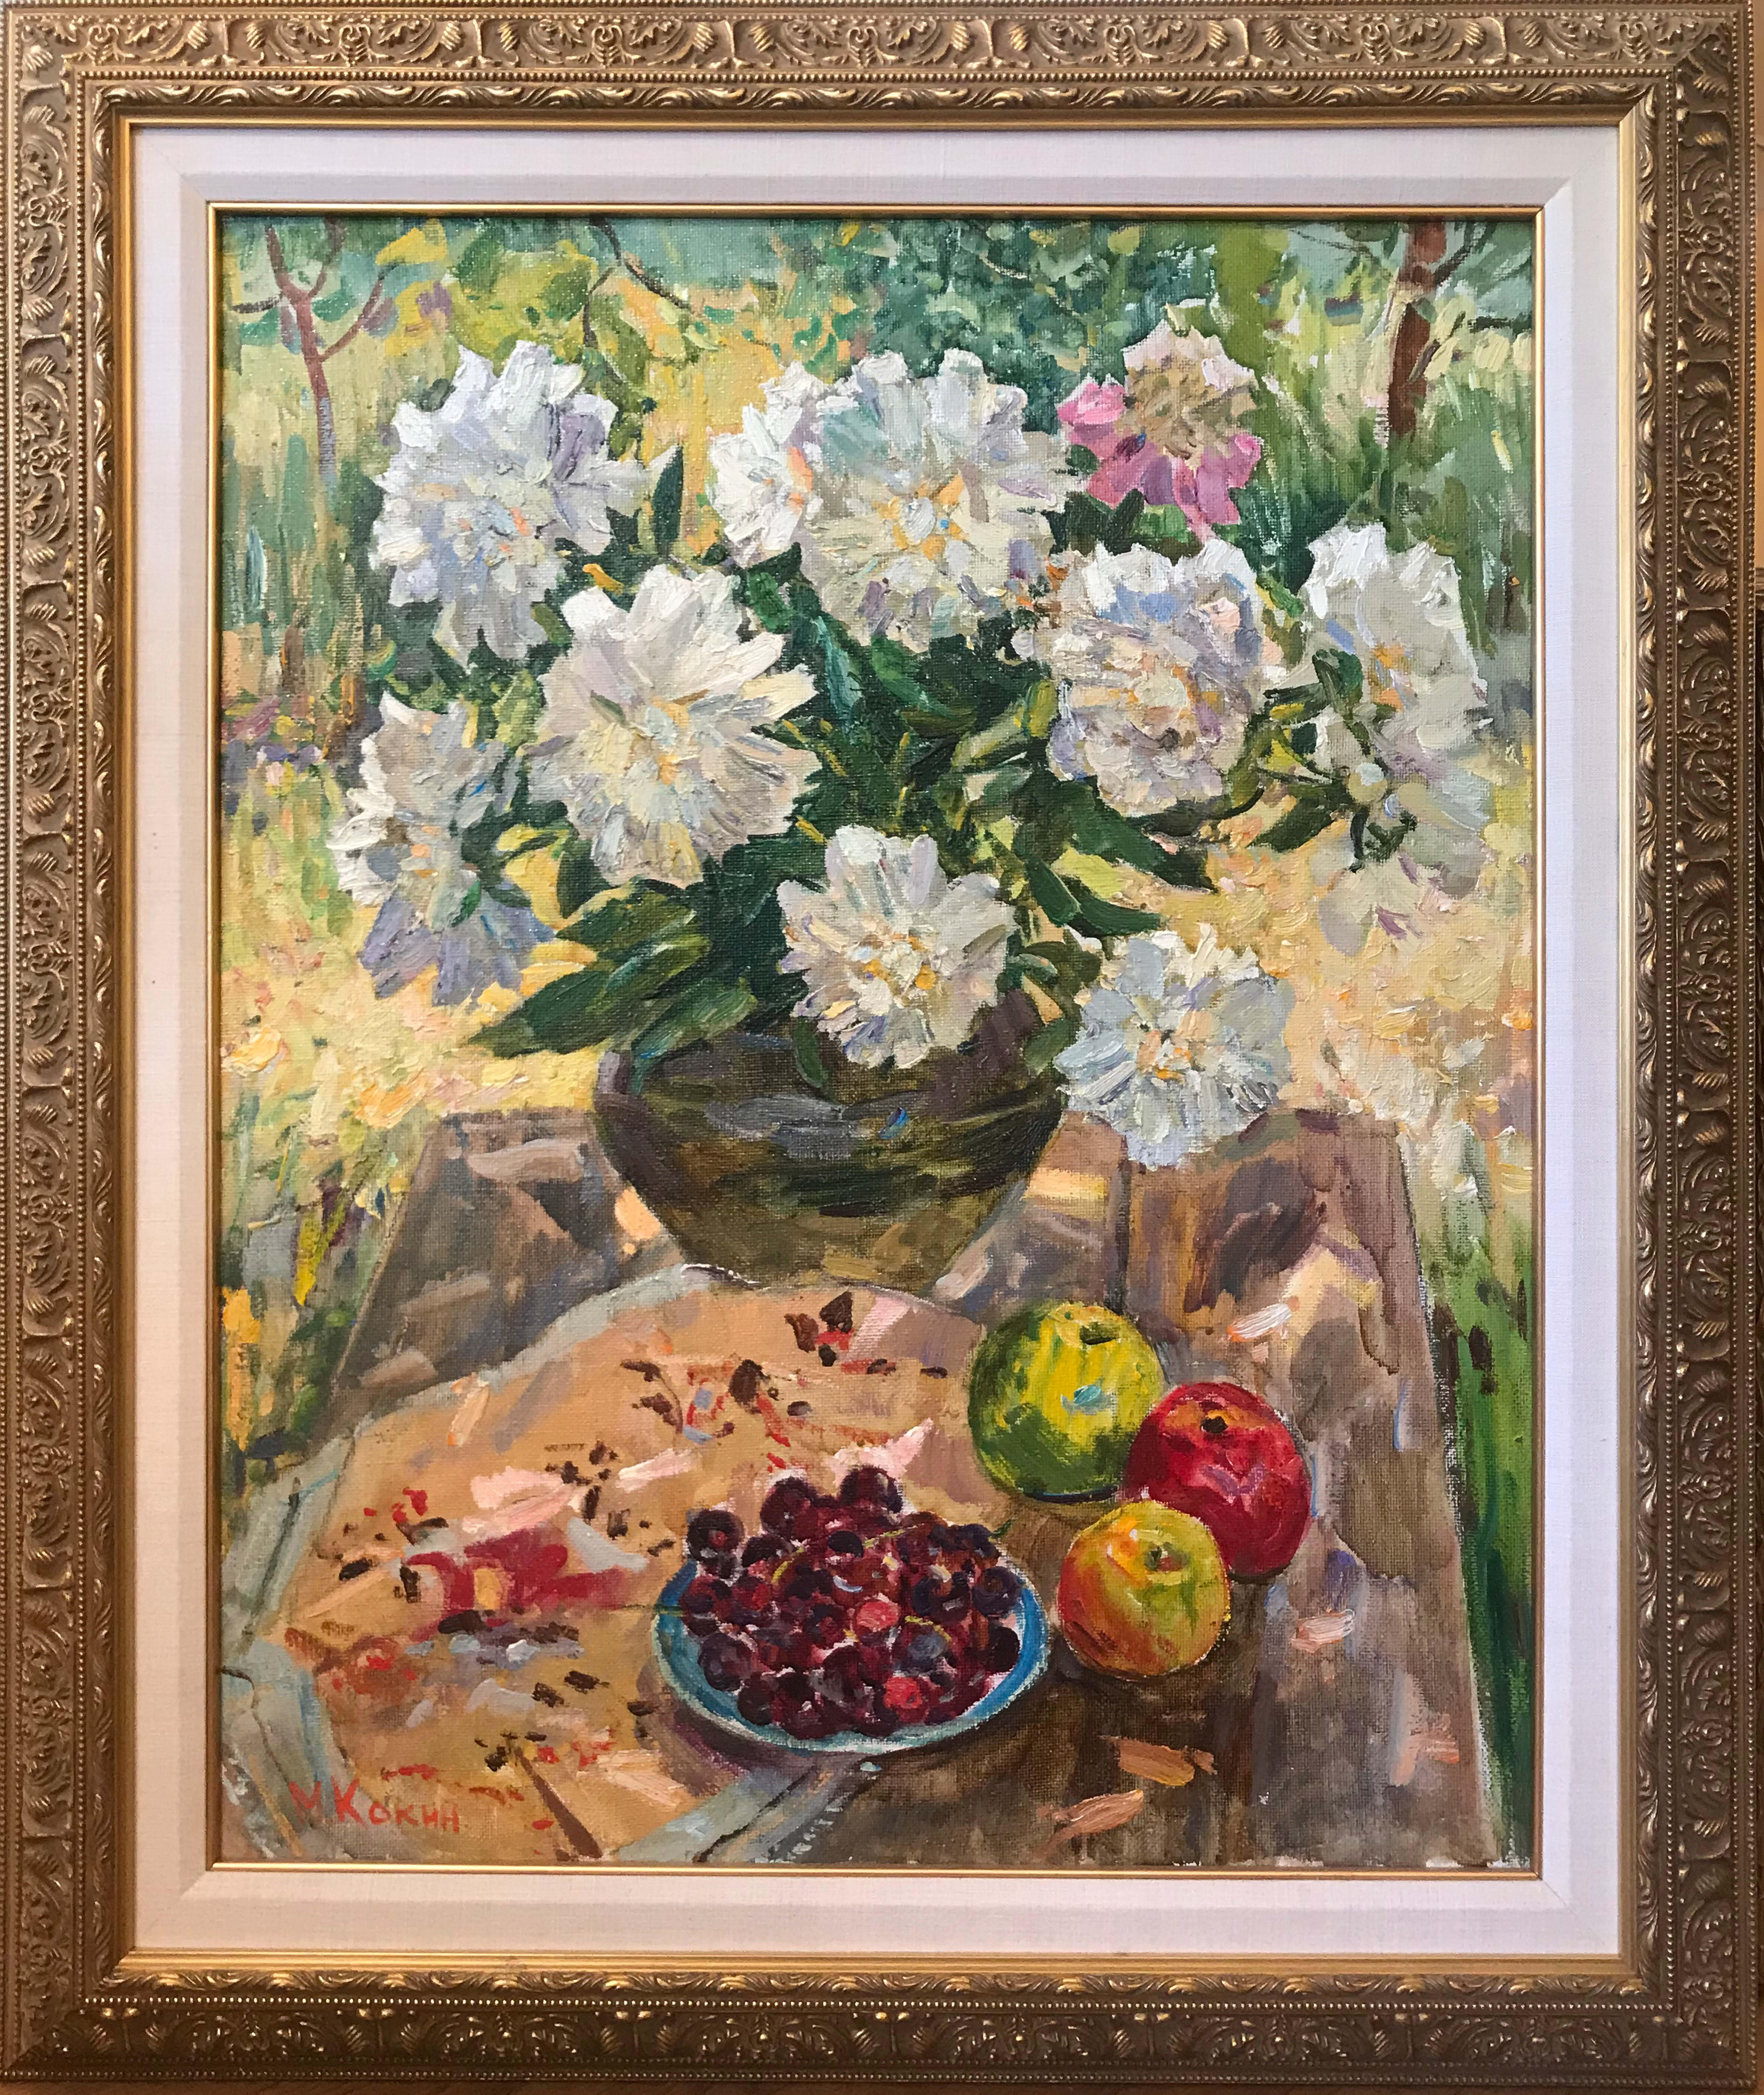 Flores y Frutas - Painting by Mikhail Kokin